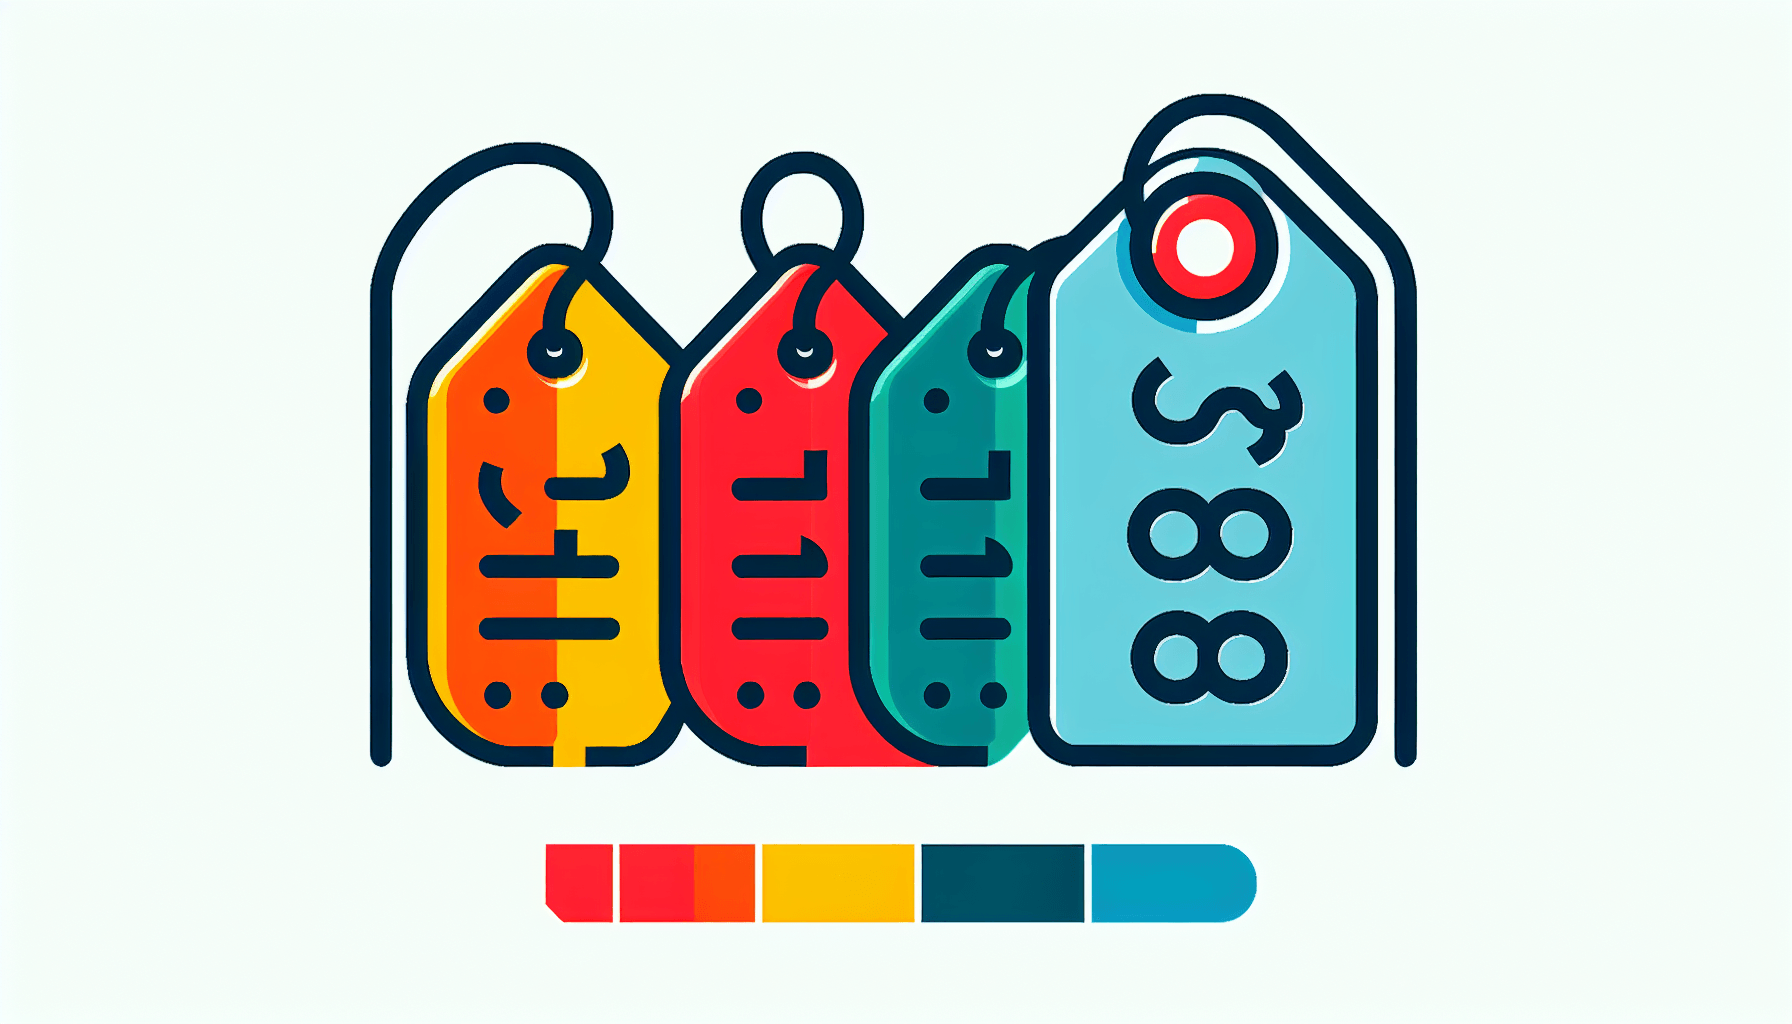 Price tag in flat illustration style and white background, red #f47574, green #88c7a8, yellow #fcc44b, and blue #645bc8 colors.